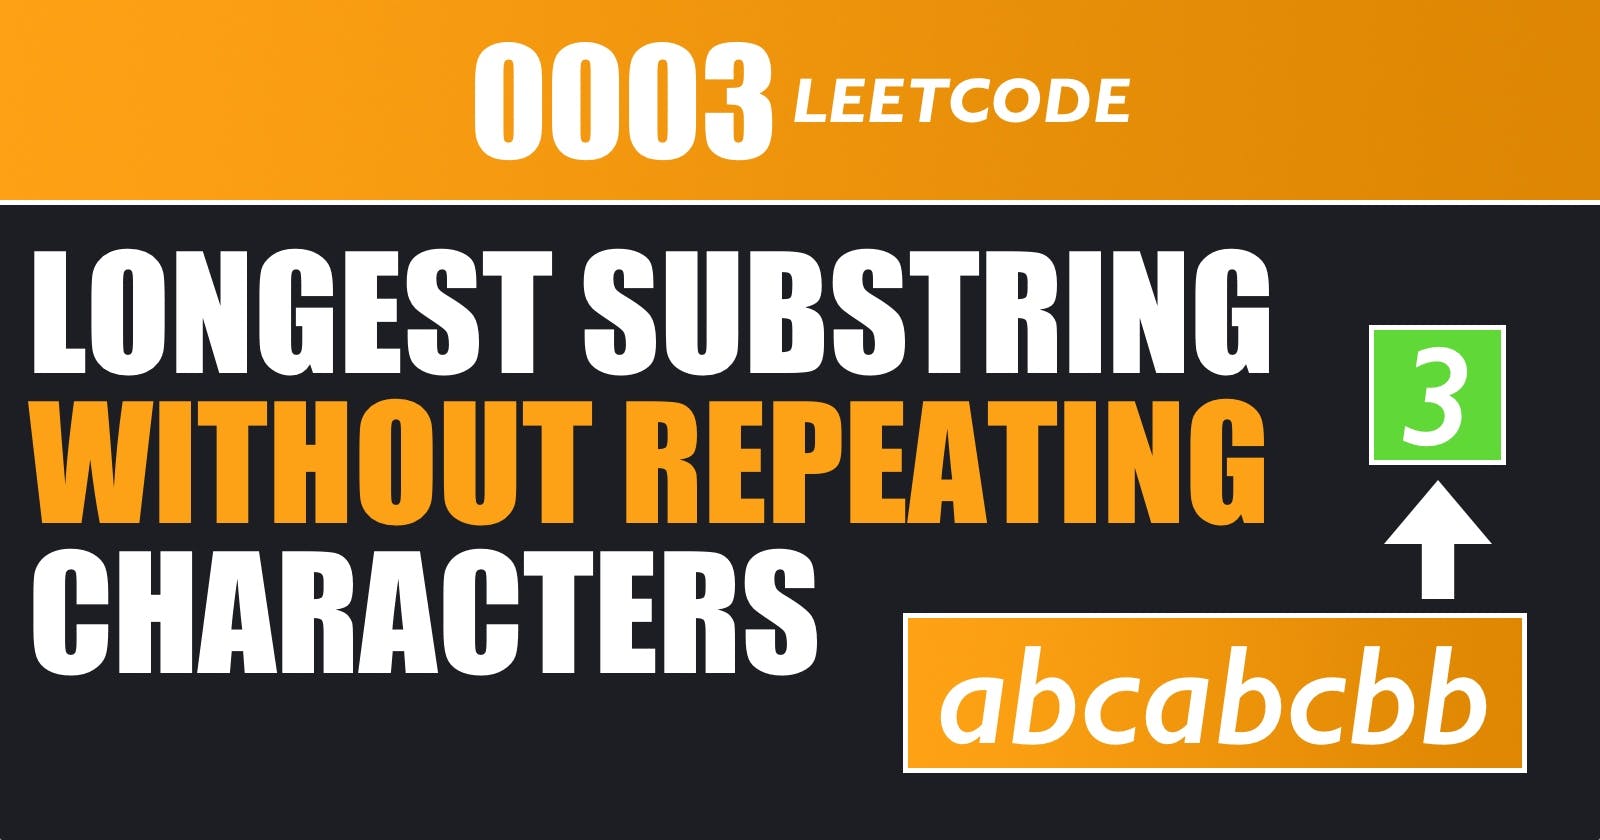 Longest Substring Without Repeating Characters - Leetcode 3